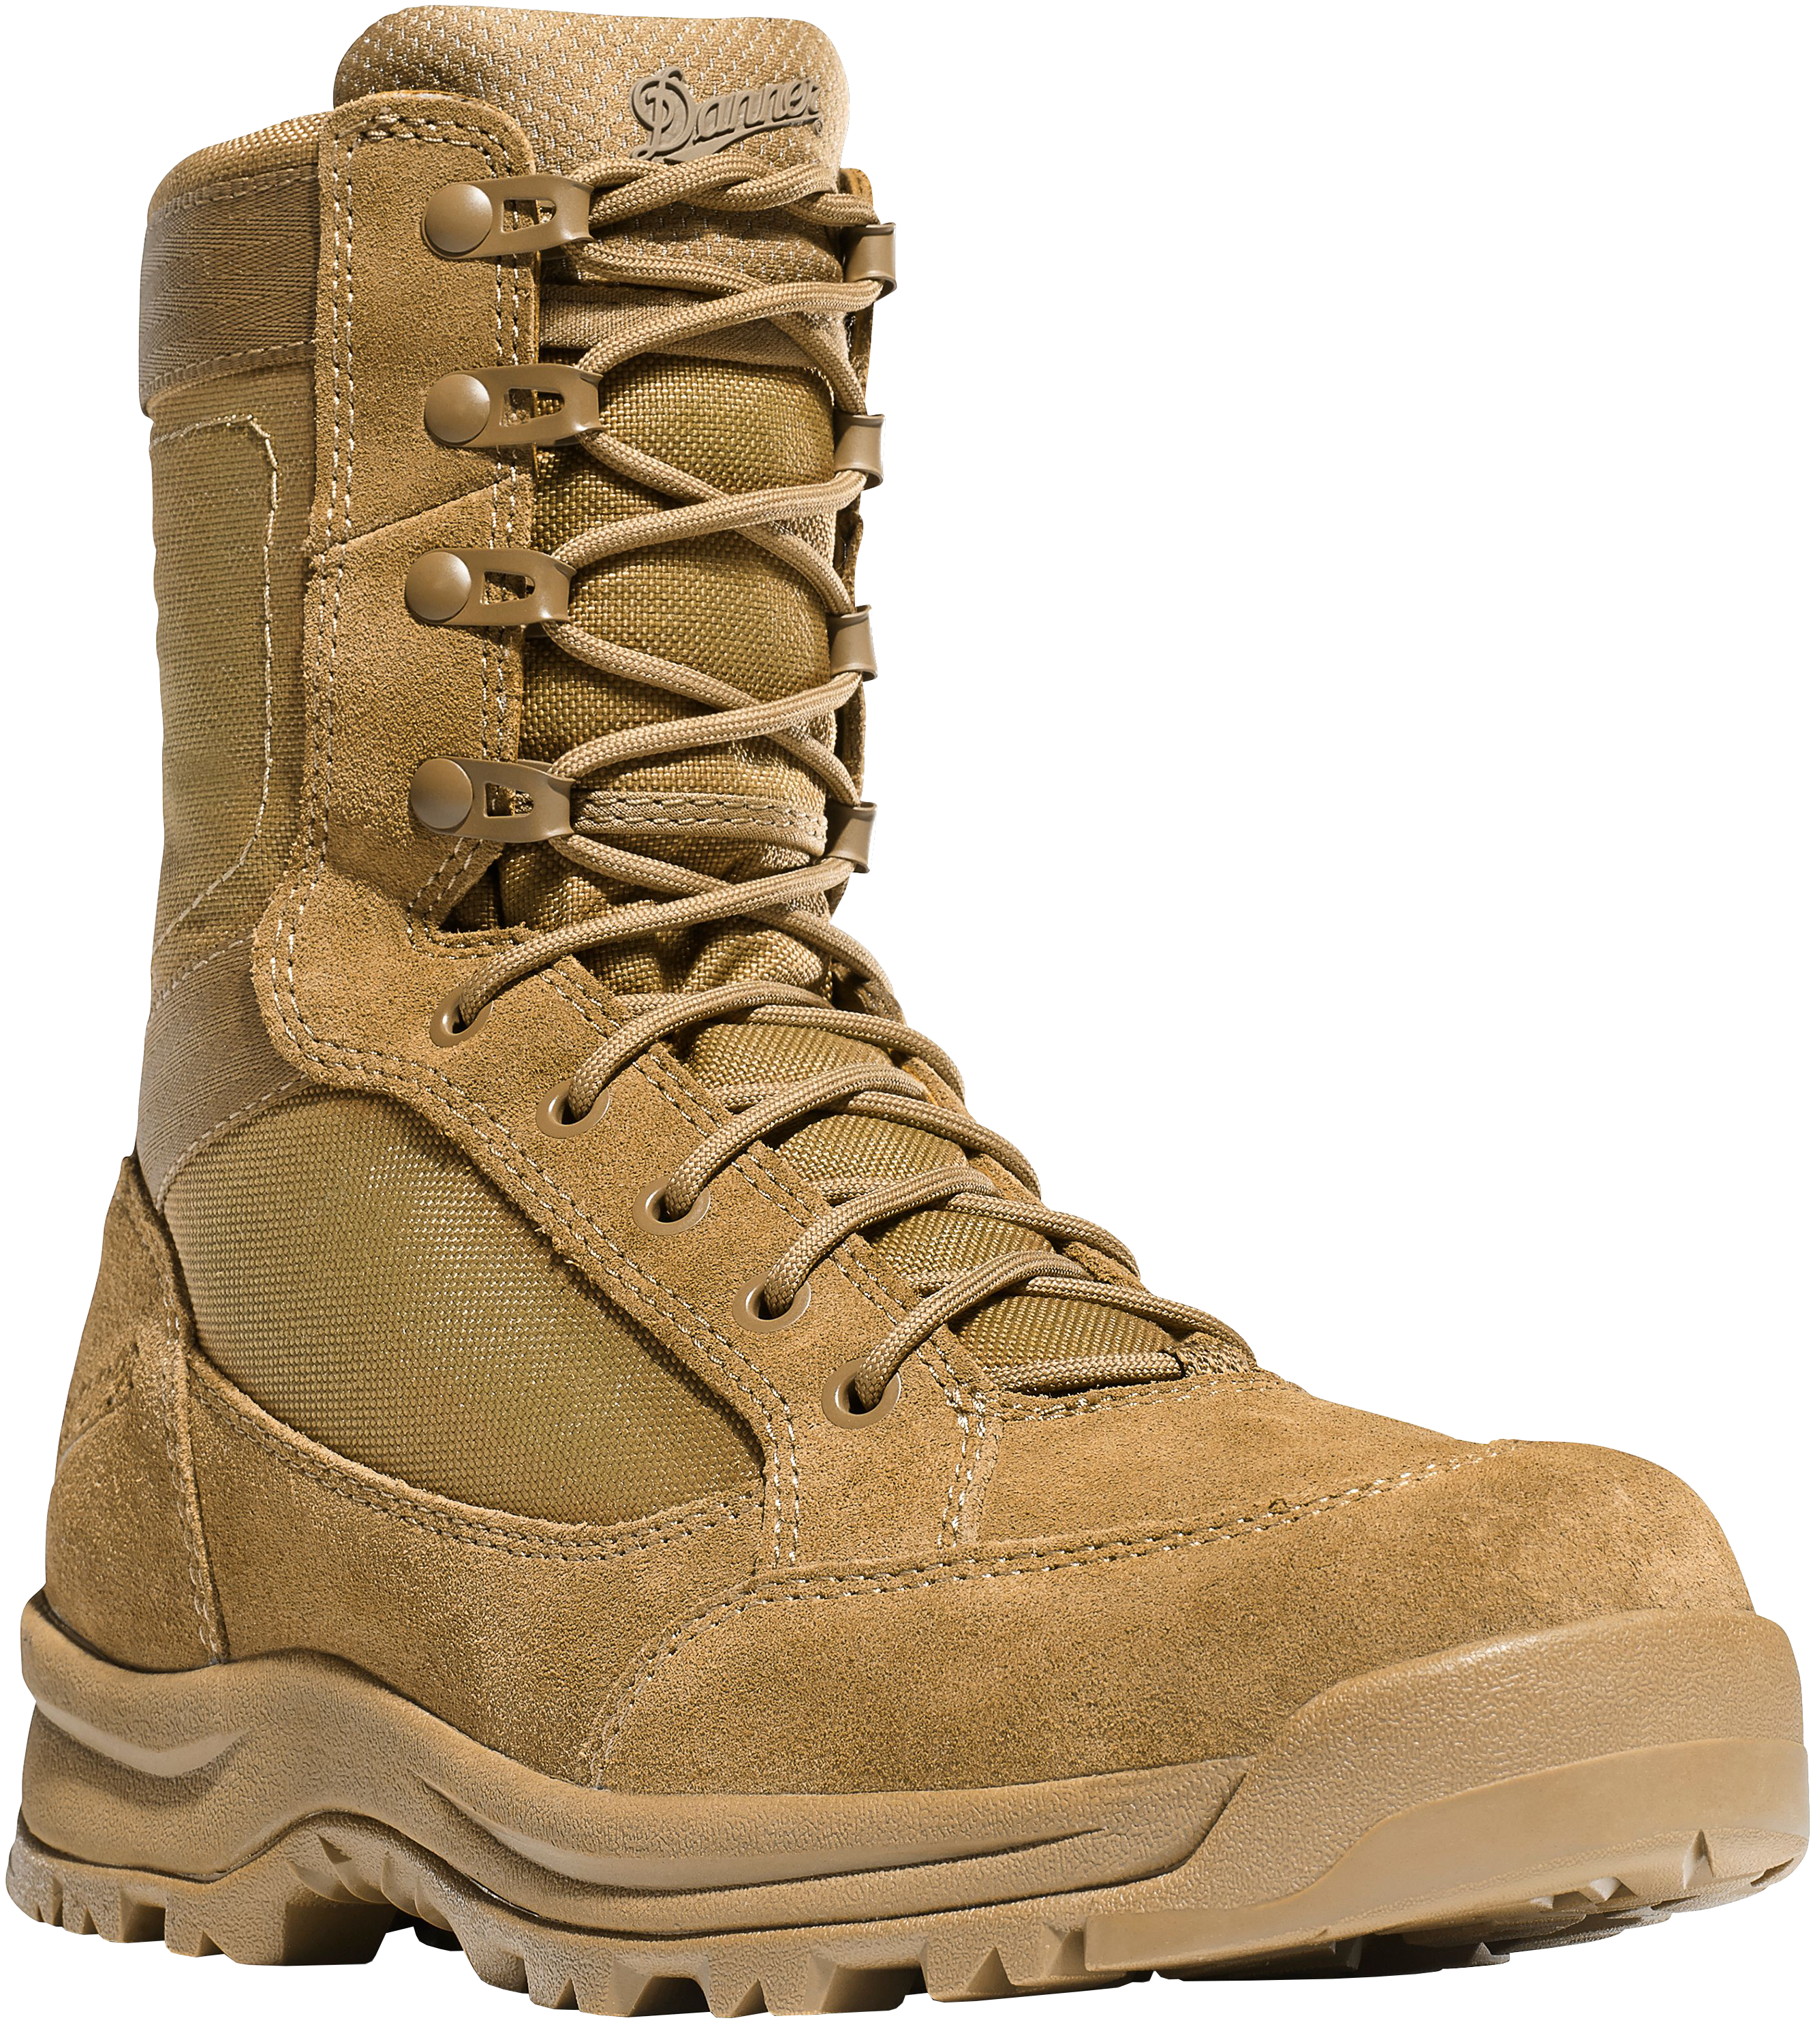 Danner Tanicus 8"" Tactical Duty Boots for Men - Coyote - 3.5M